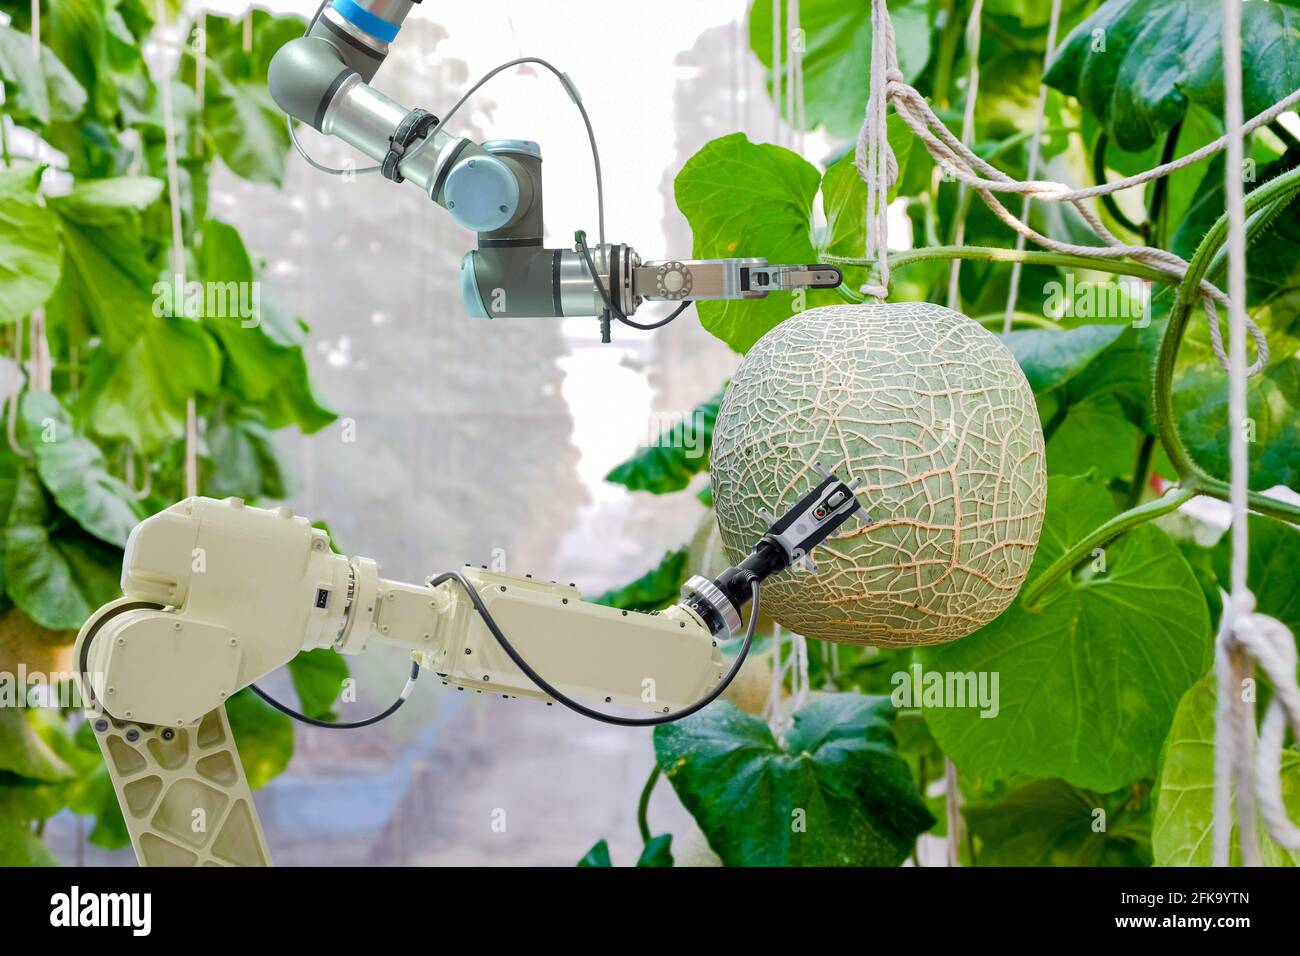 Close-up smart robotic gripping and scanning arms that installed an inside on melon greenhouse garden for assistant farmers harvest melon fruits Stock Photo